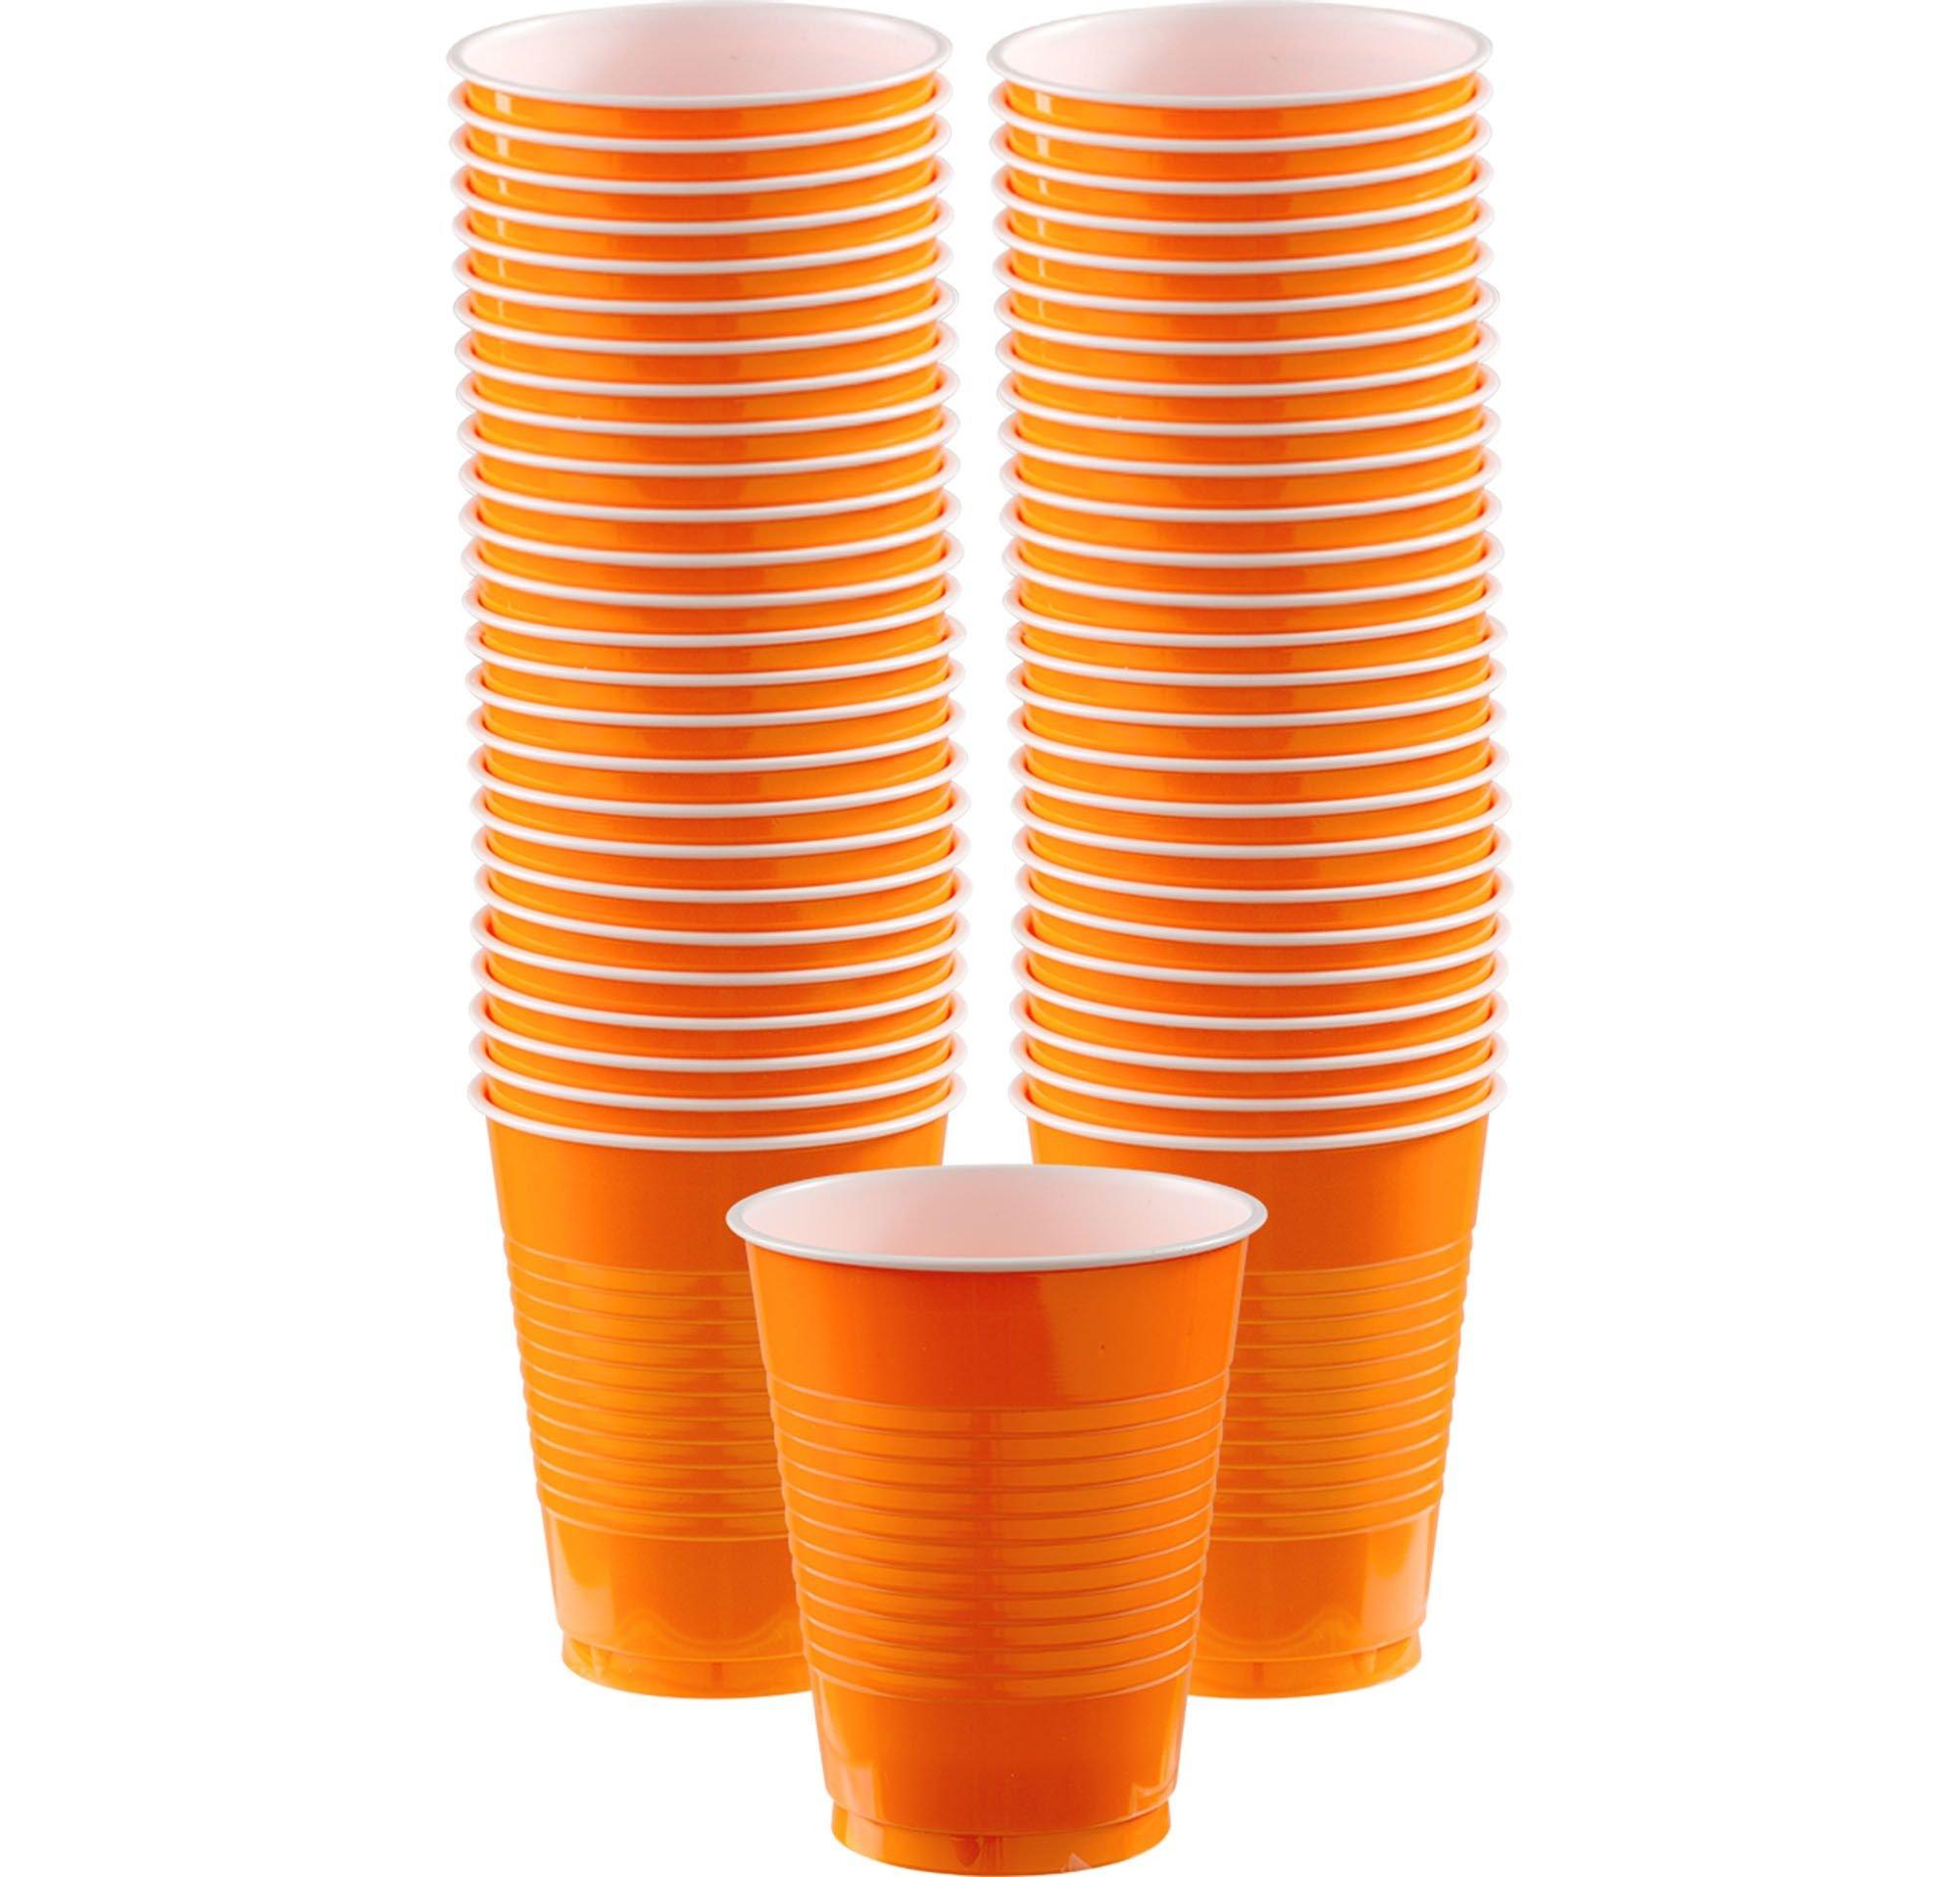 Solo Assorted 18-Ounce Color Plastic Cups, 50 Count